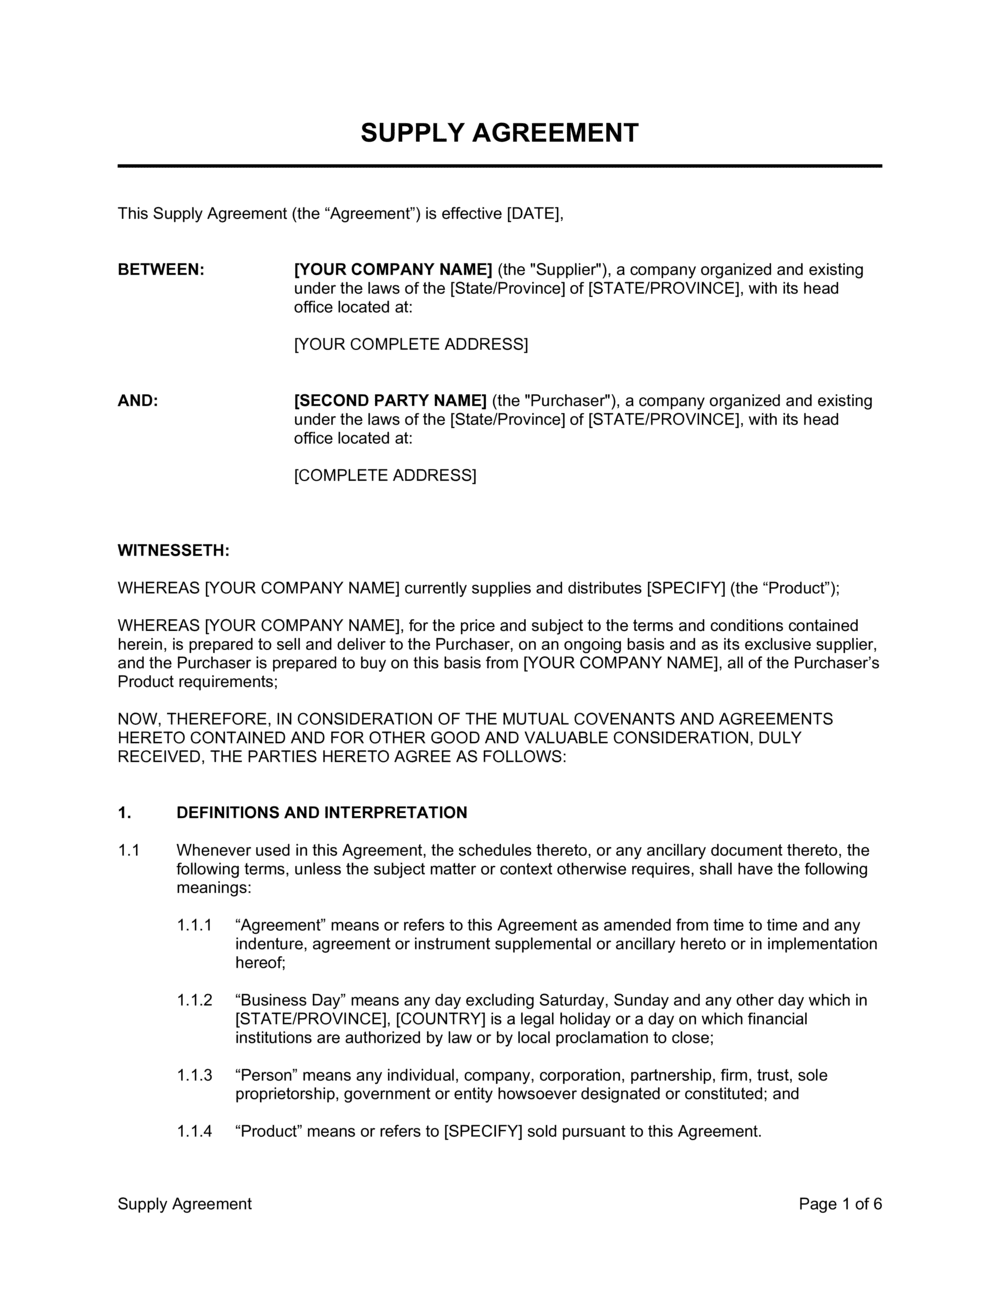 Supply Agreement Template  by Business-in-a-Box™ Intended For manufacturing supply agreement templates